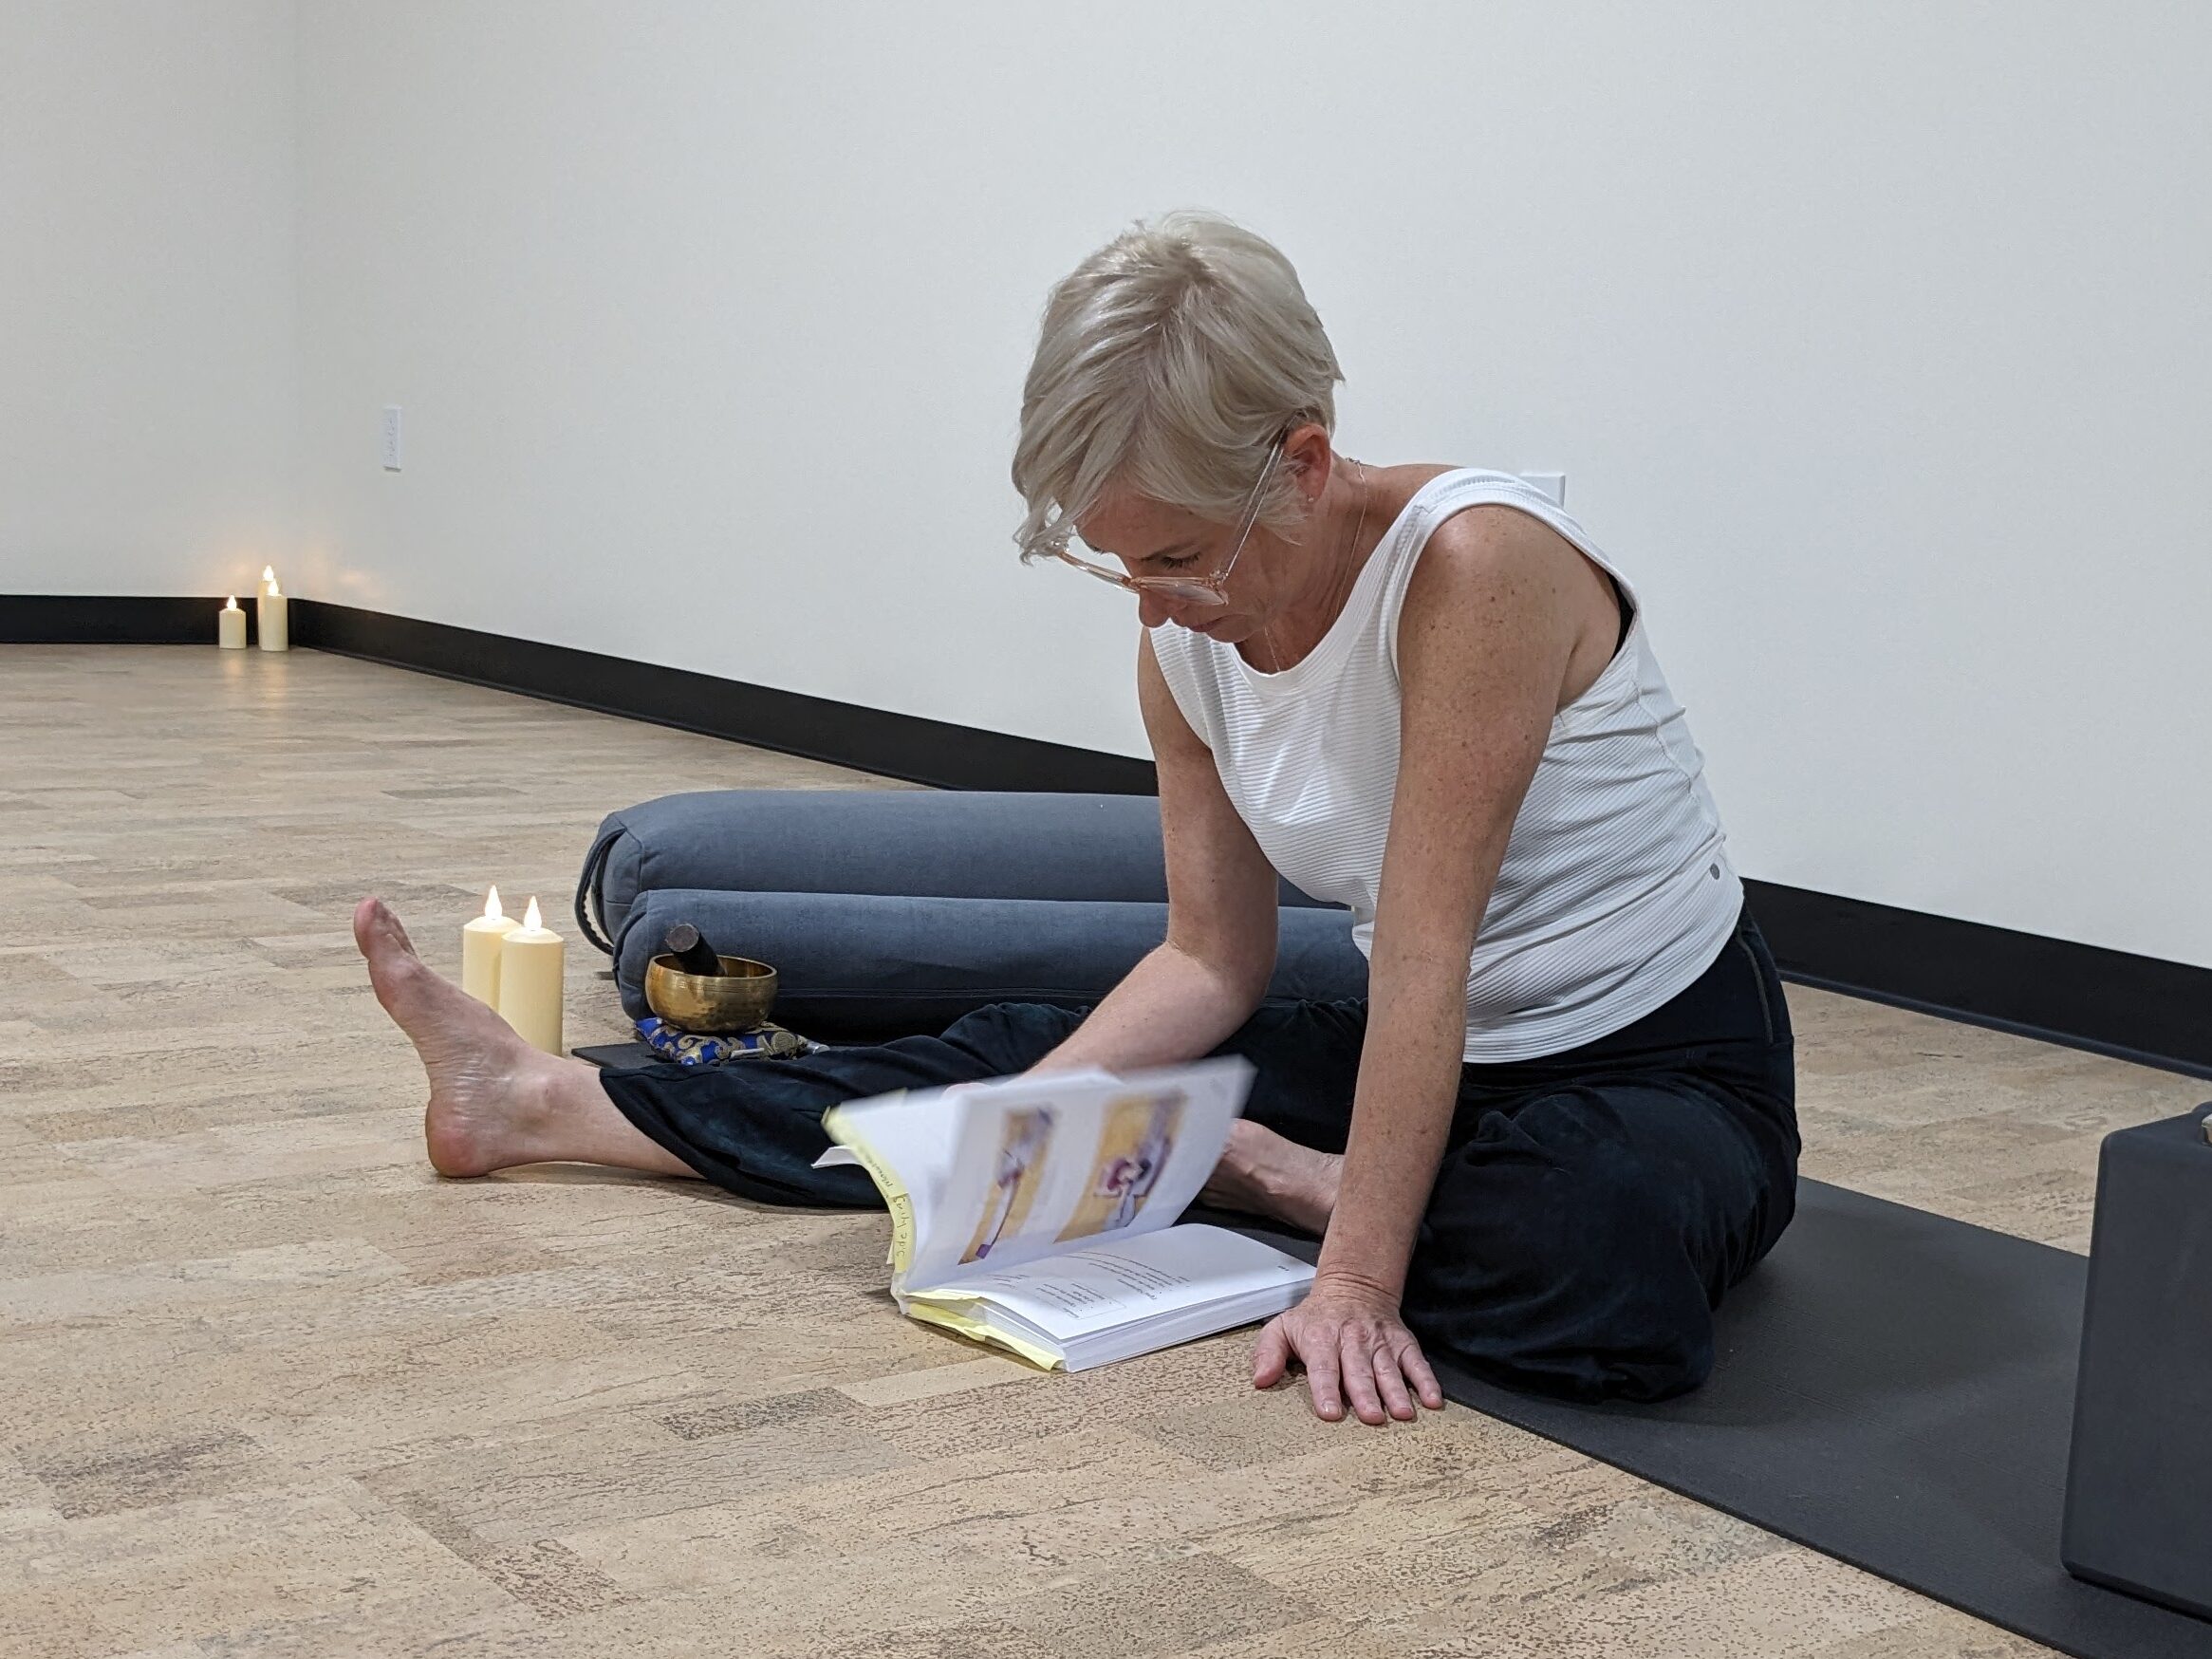 courtney reading with yoga class